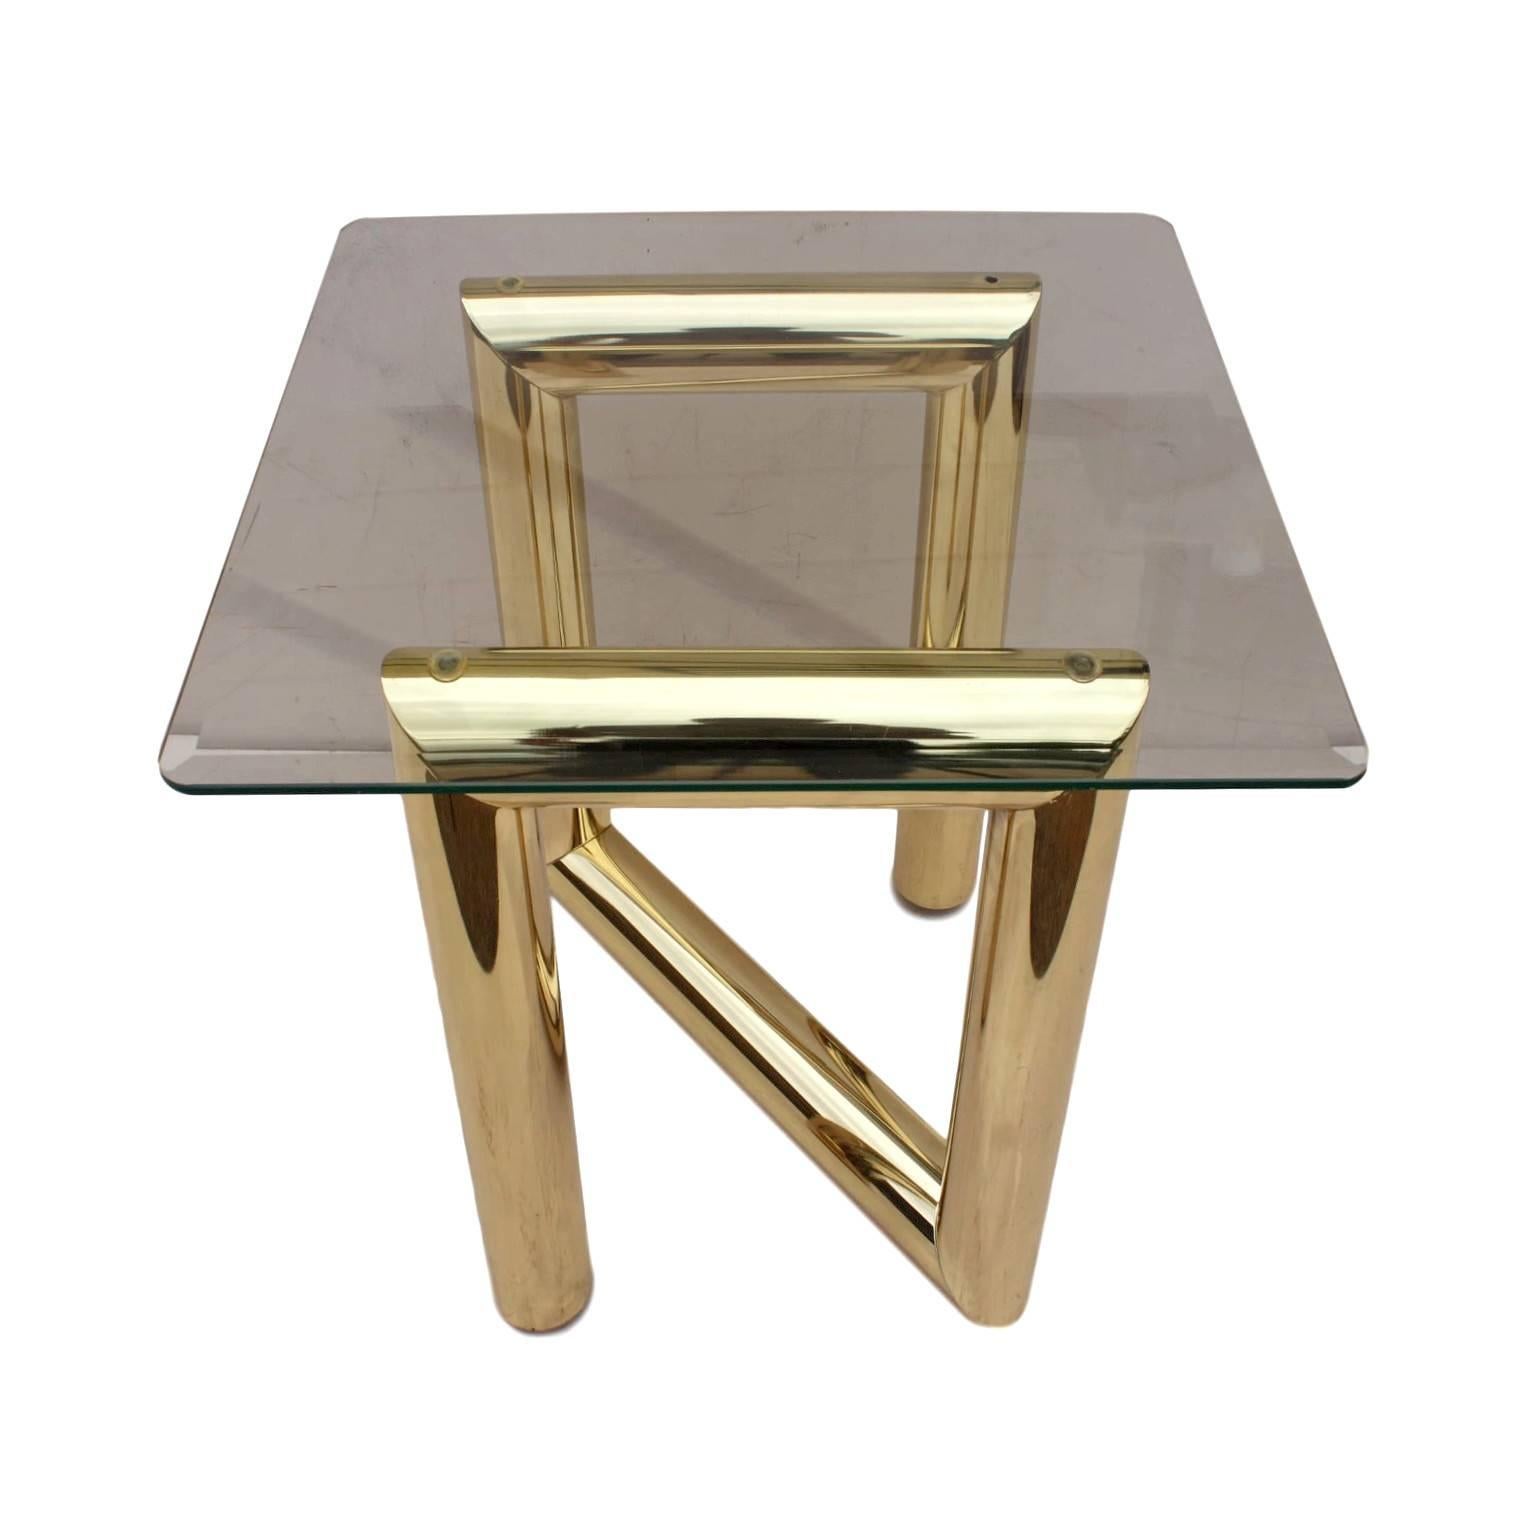 This tubular brass-lacquered and beveled-glass side table.  Table features:

3